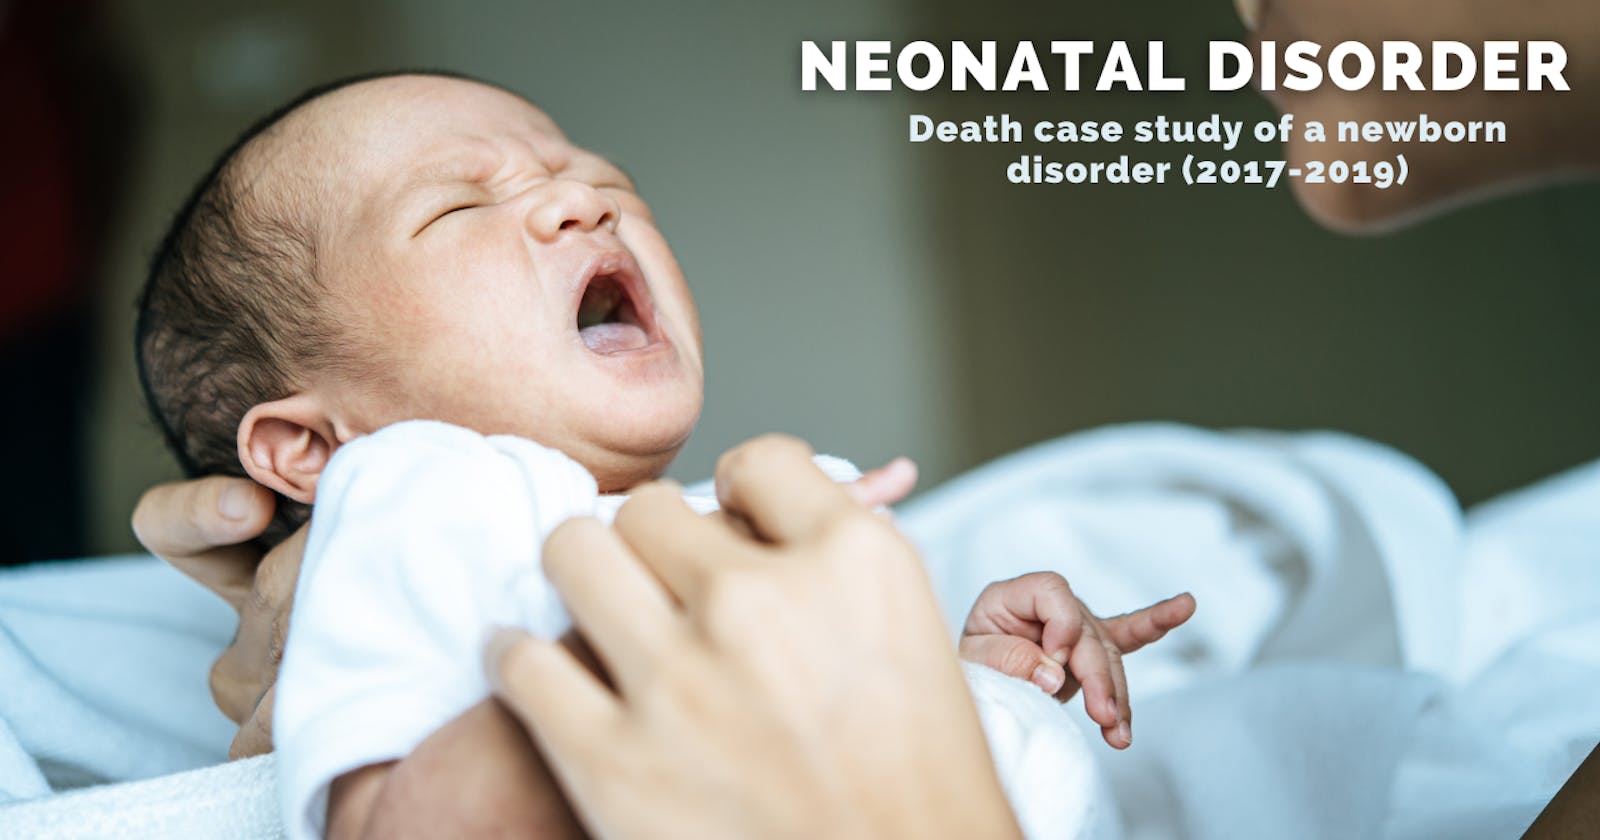 Neonatal Disorder and its mortality rate.